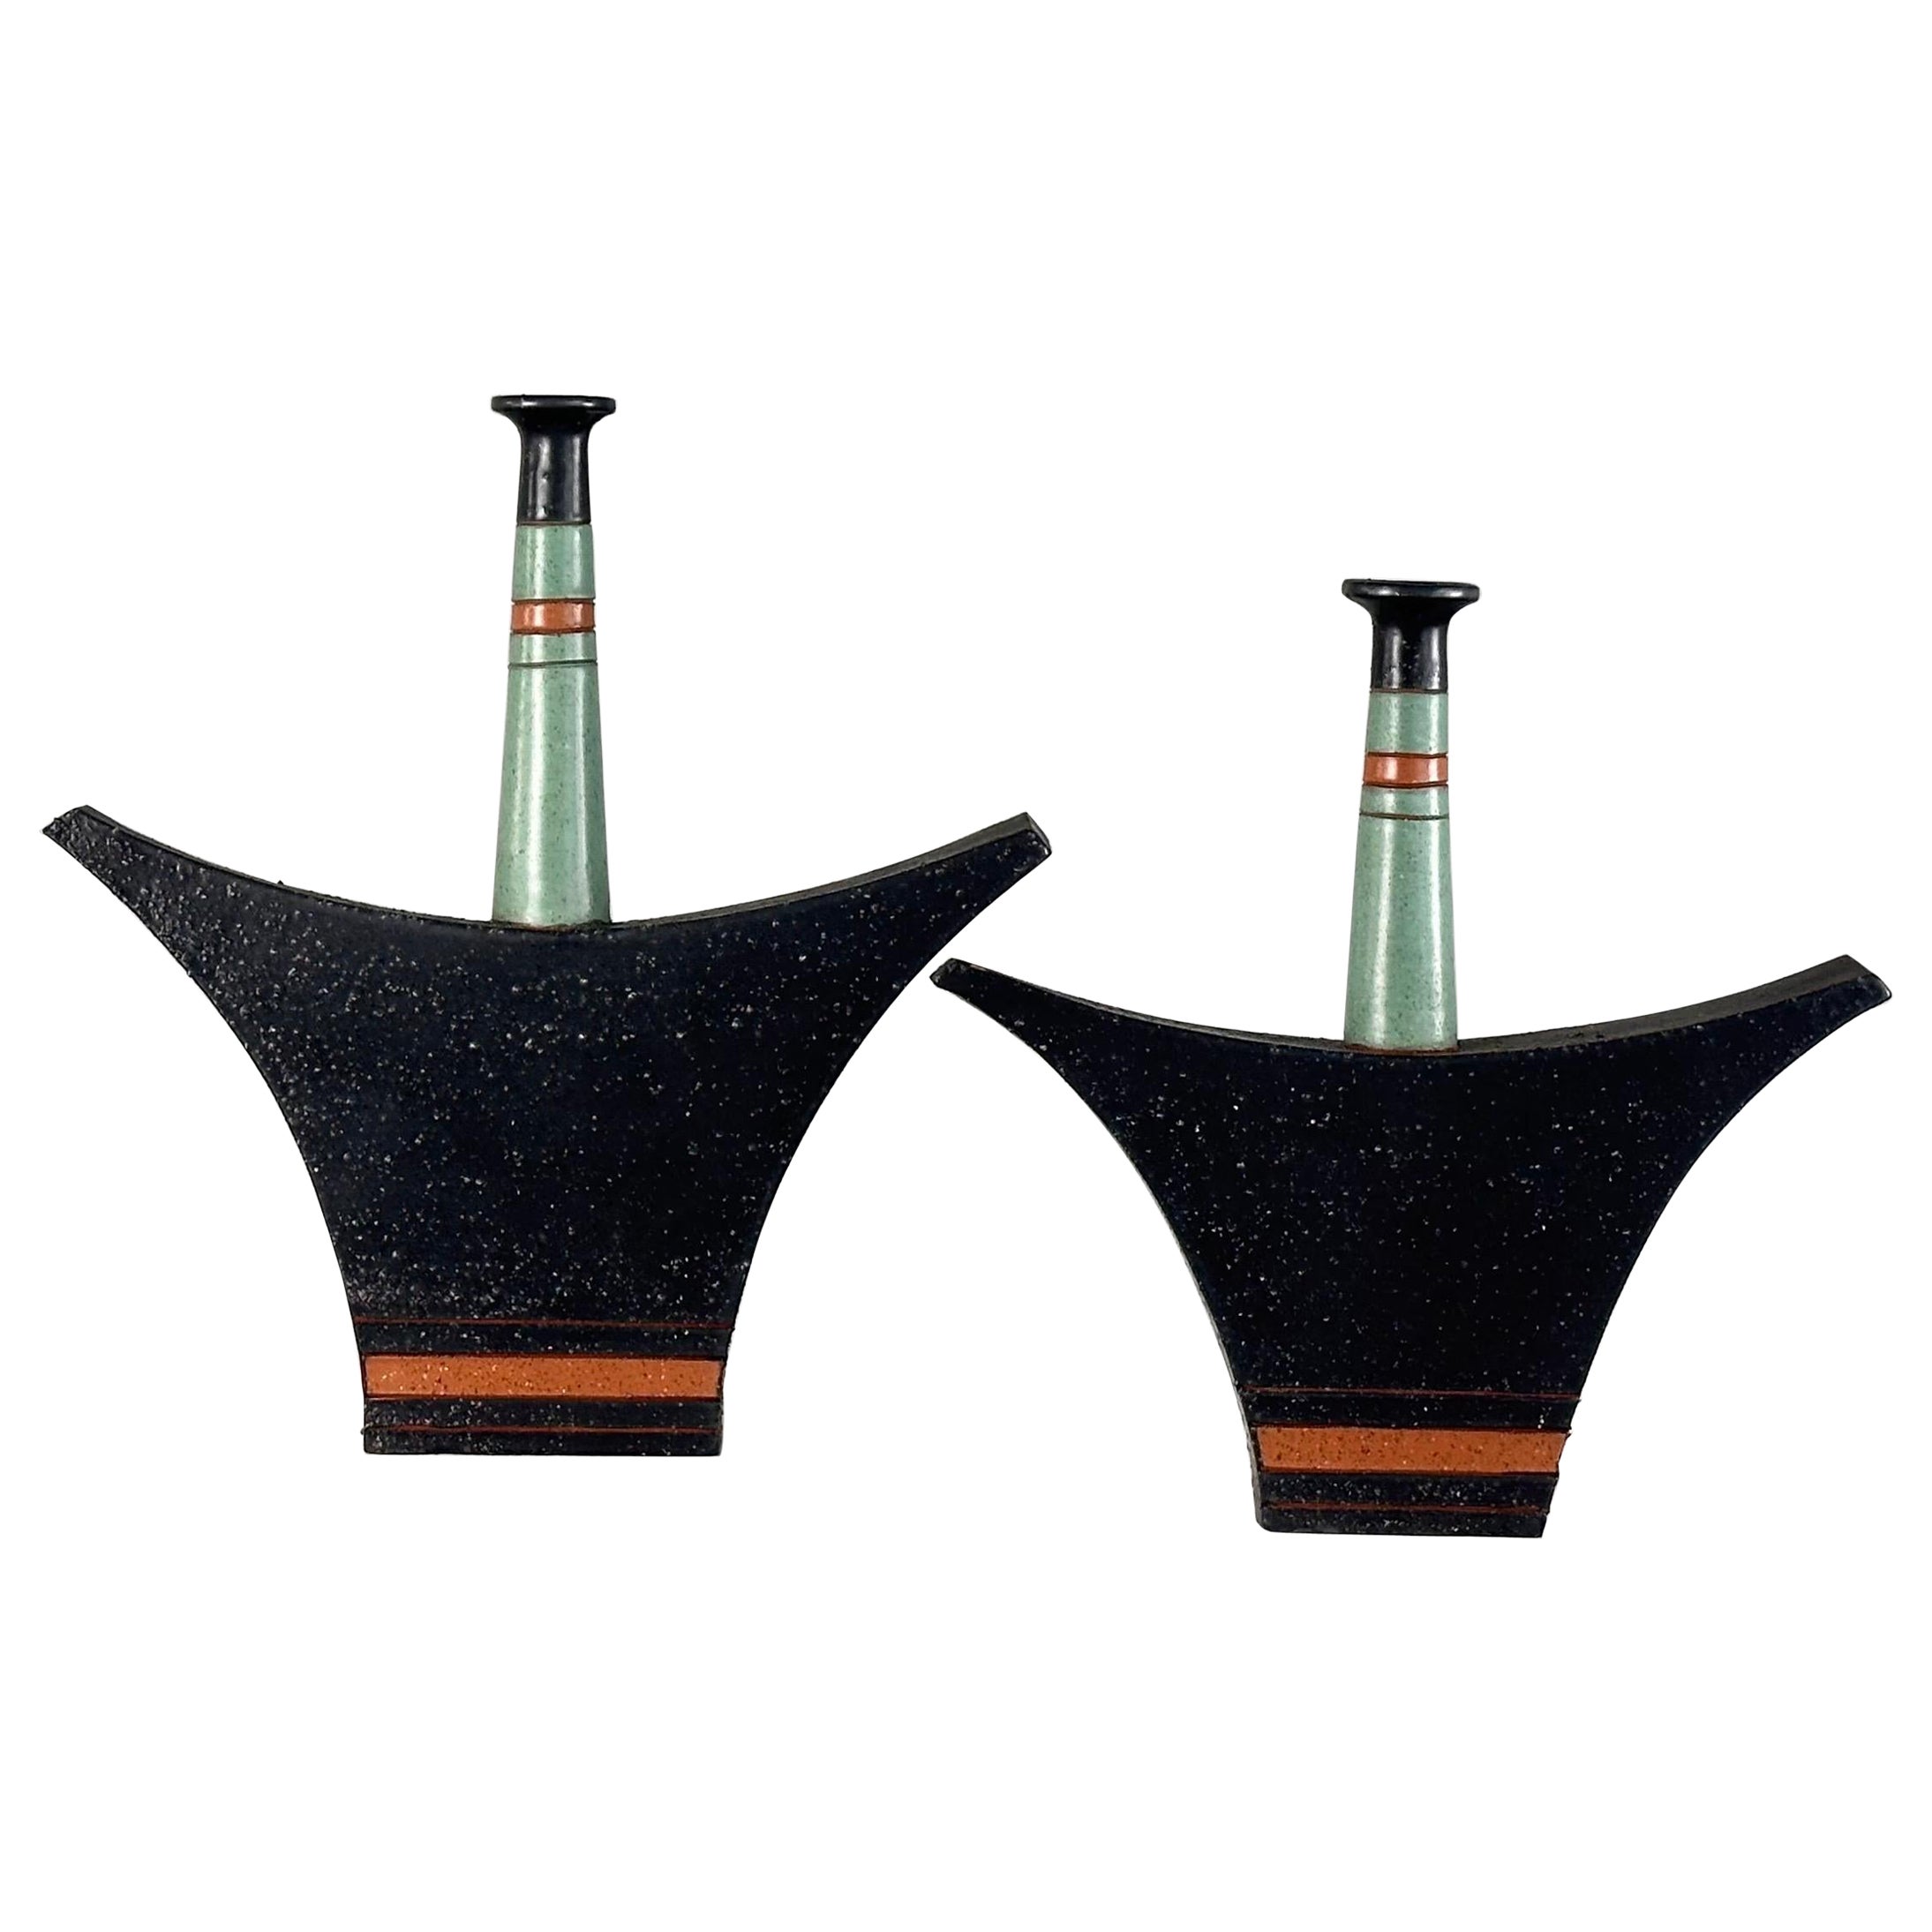 Pair of Ceramic Monofloral/Decorative Vases by Vanni Donzelli, Italy, 1980s For Sale